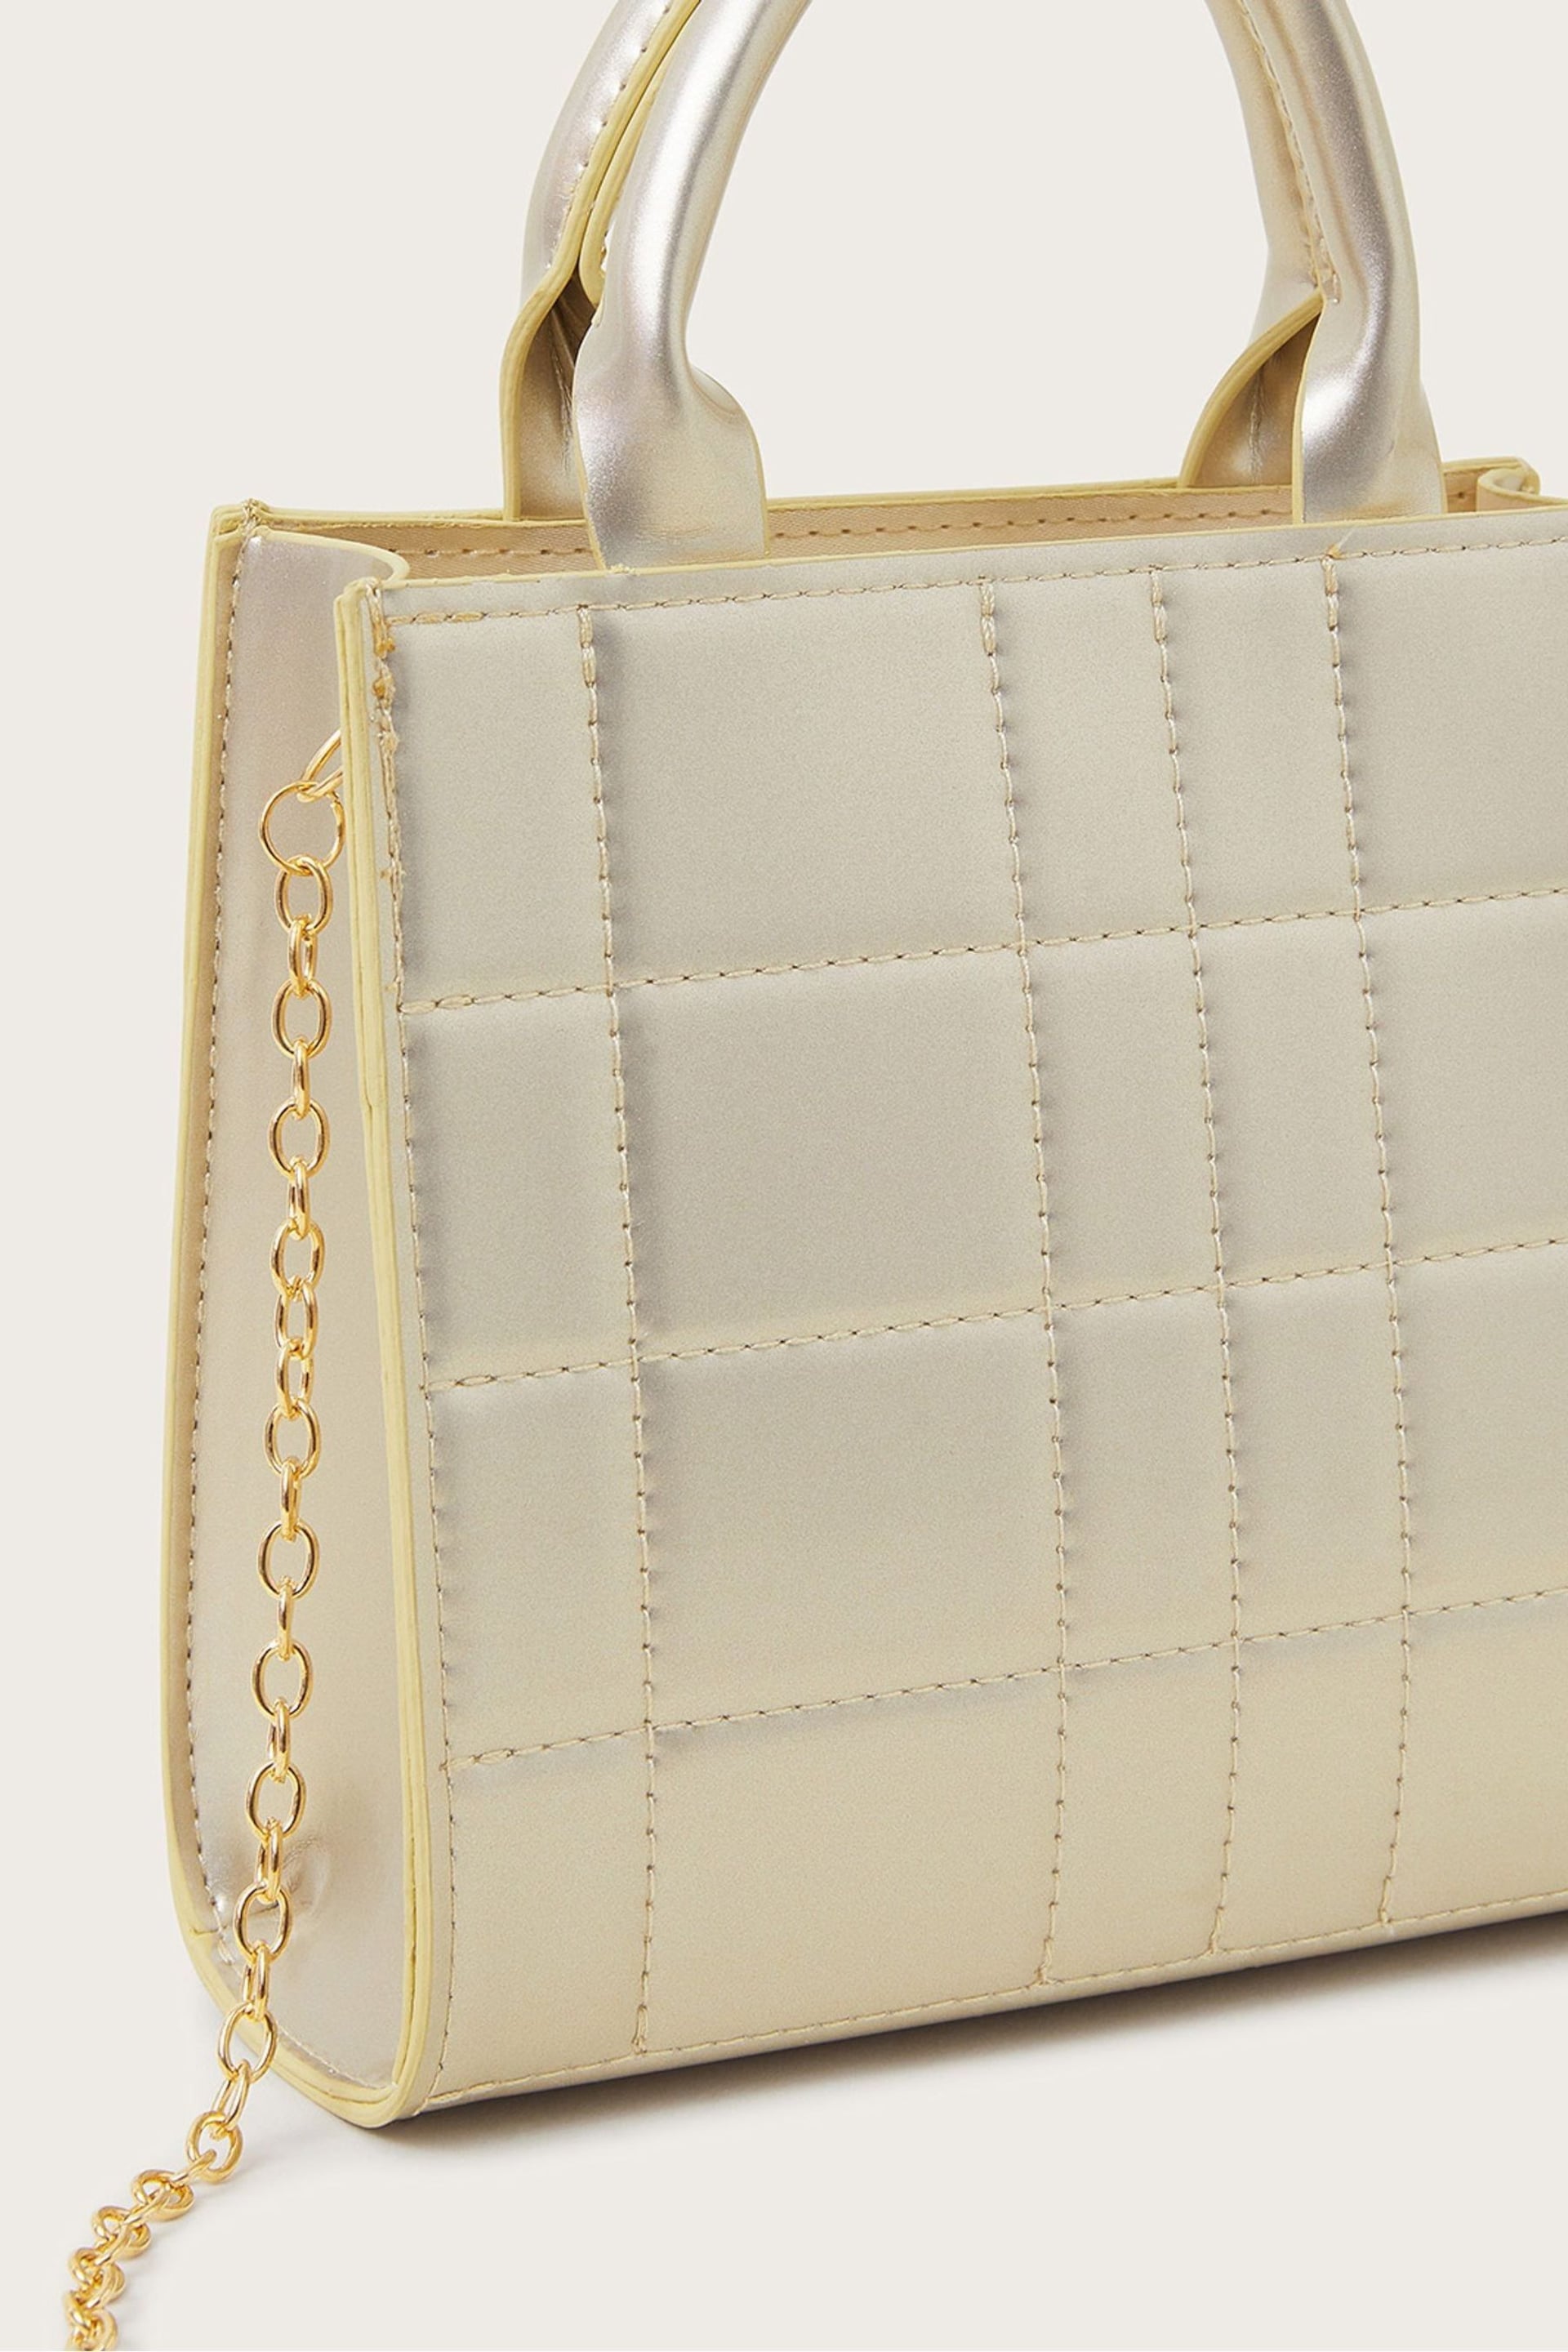 Monsoon Gold Quilted Metallic Frame Bag - Image 3 of 3